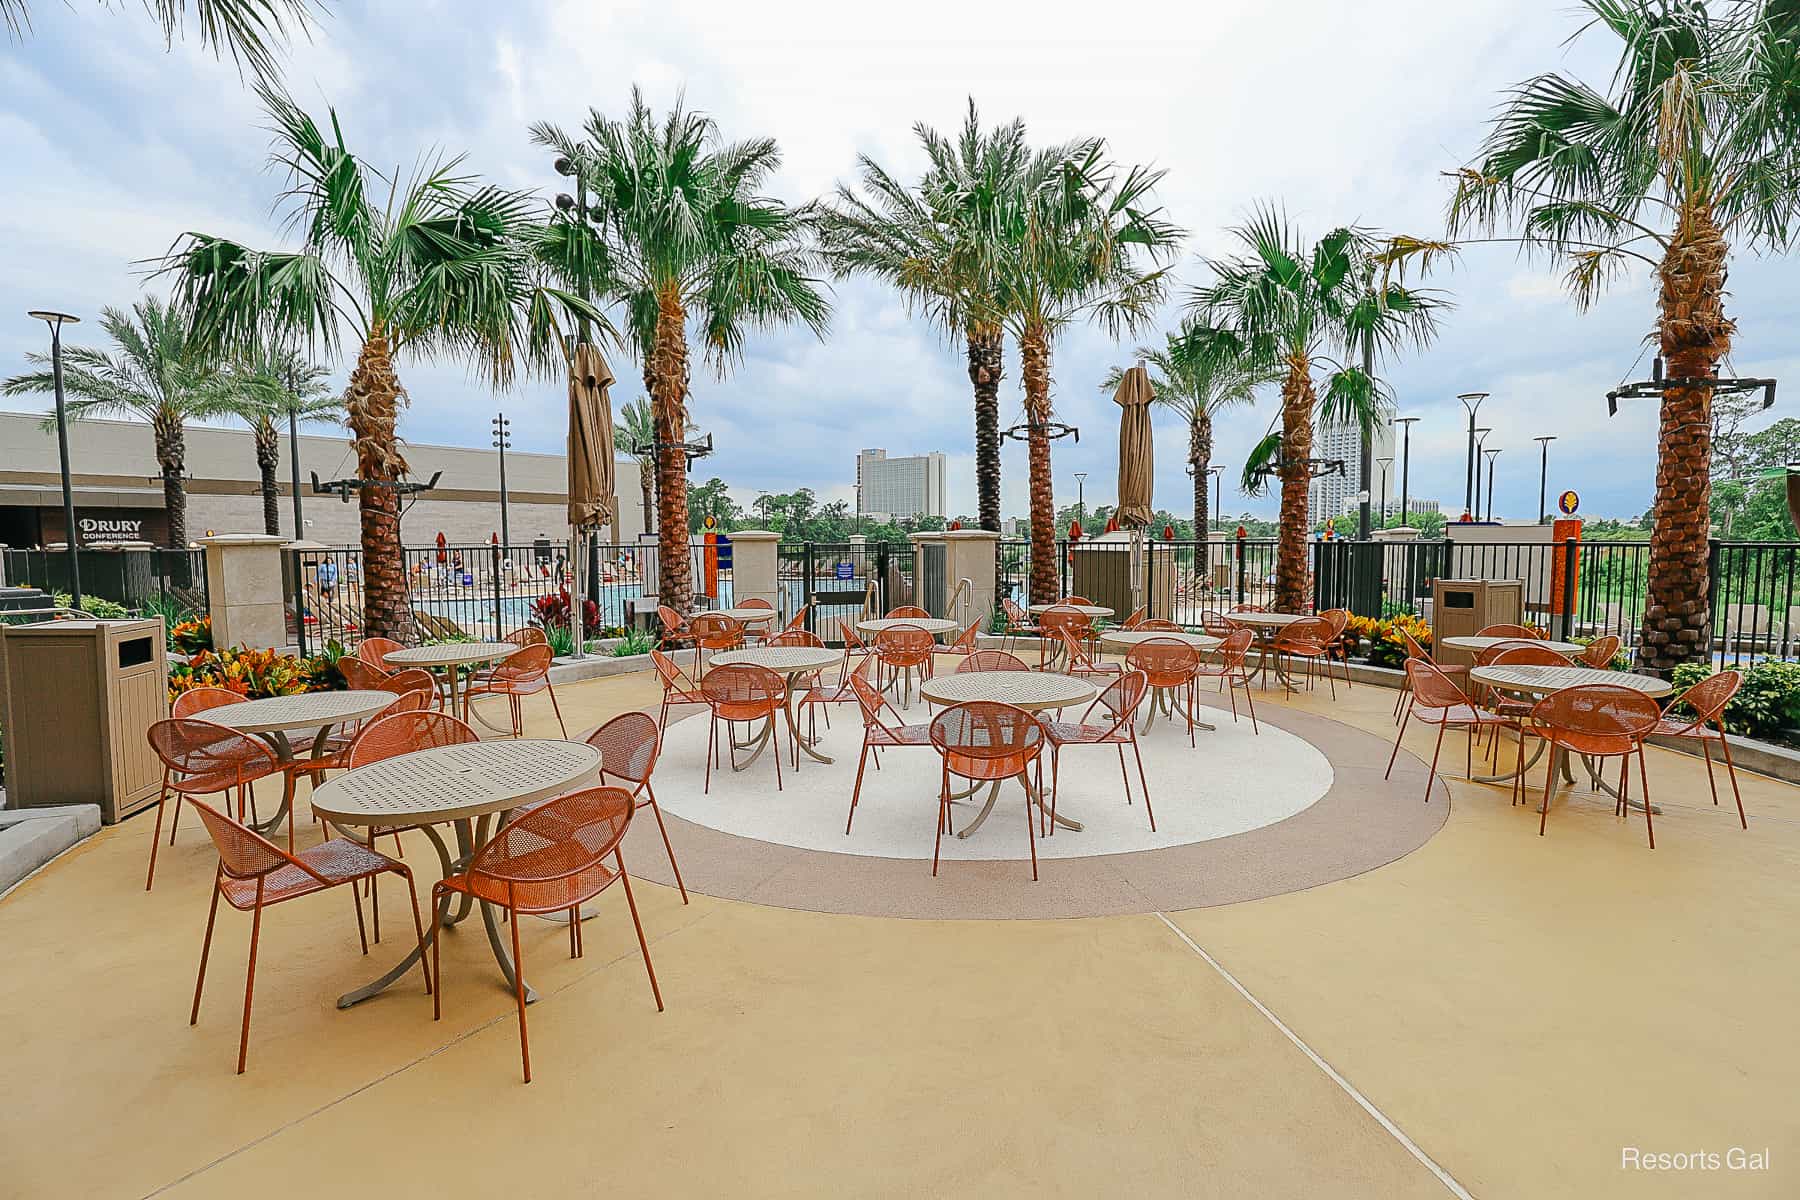 Outdoor tables and chairs on a patio surrounded by palm trees. 